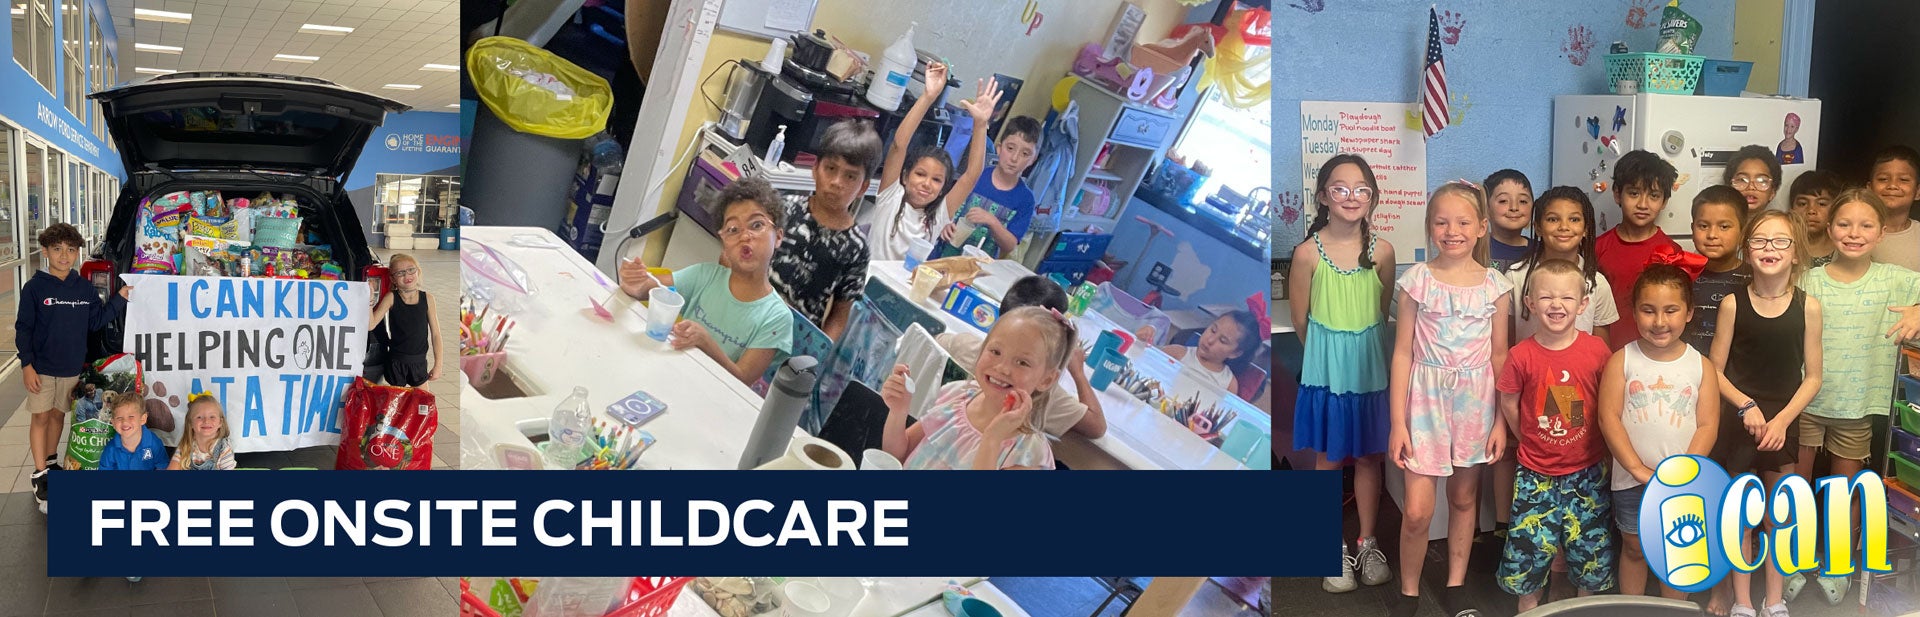 Free Onsite Childcare